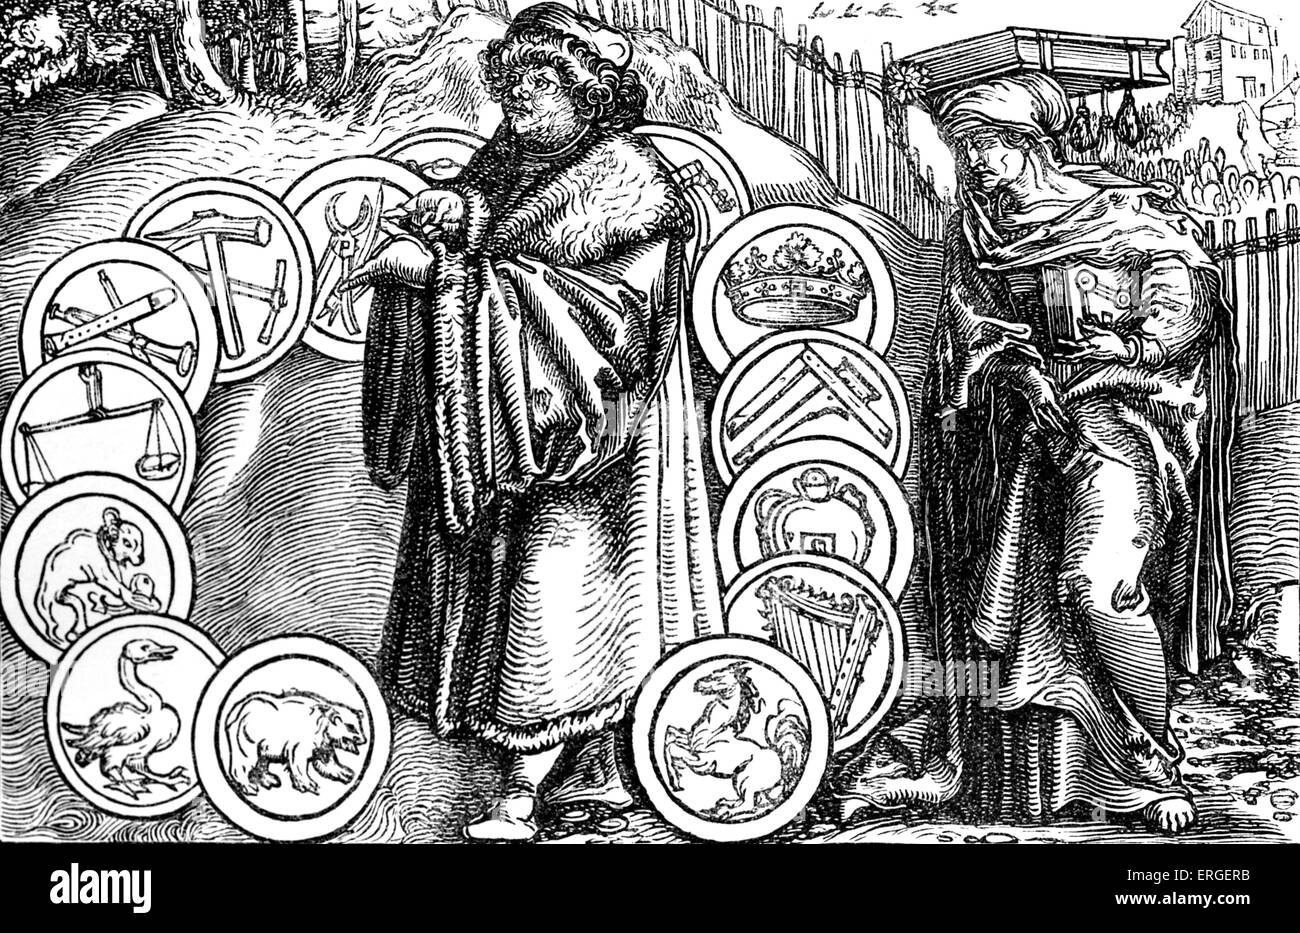 'The Natural Sciences in the Presence of Philosophy'. From facsimile of wood engraving attributed to Holbein in German Stock Photo